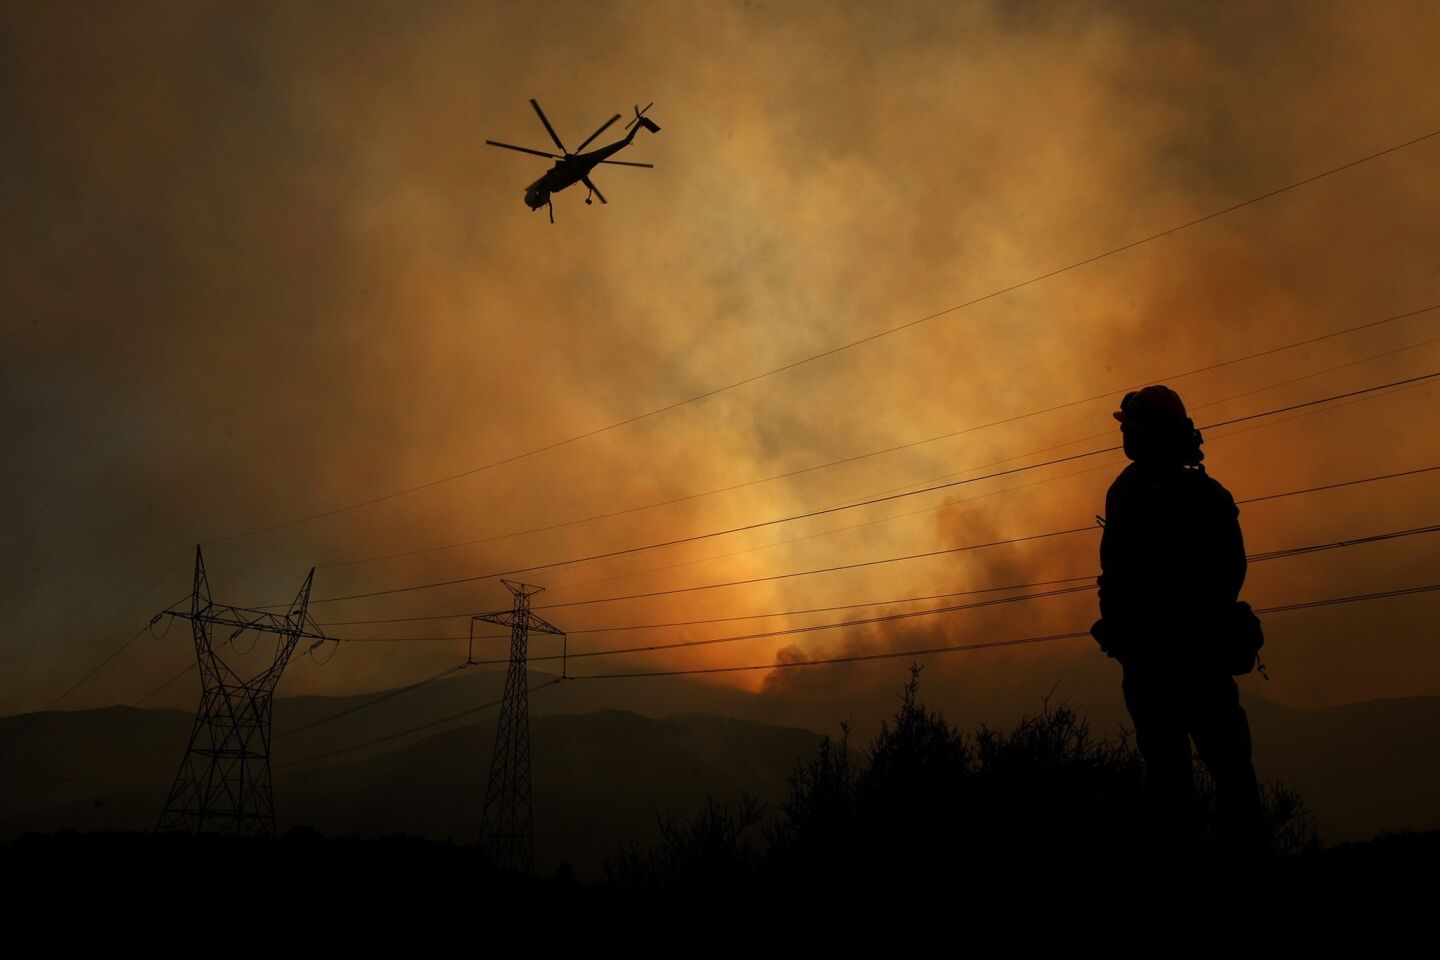 Fire Capt. Gus Munguia watches as a helicopter prepares to drop a load of water on the Powerhouse fire in Green Valley along San Francisquito Canyon Road.